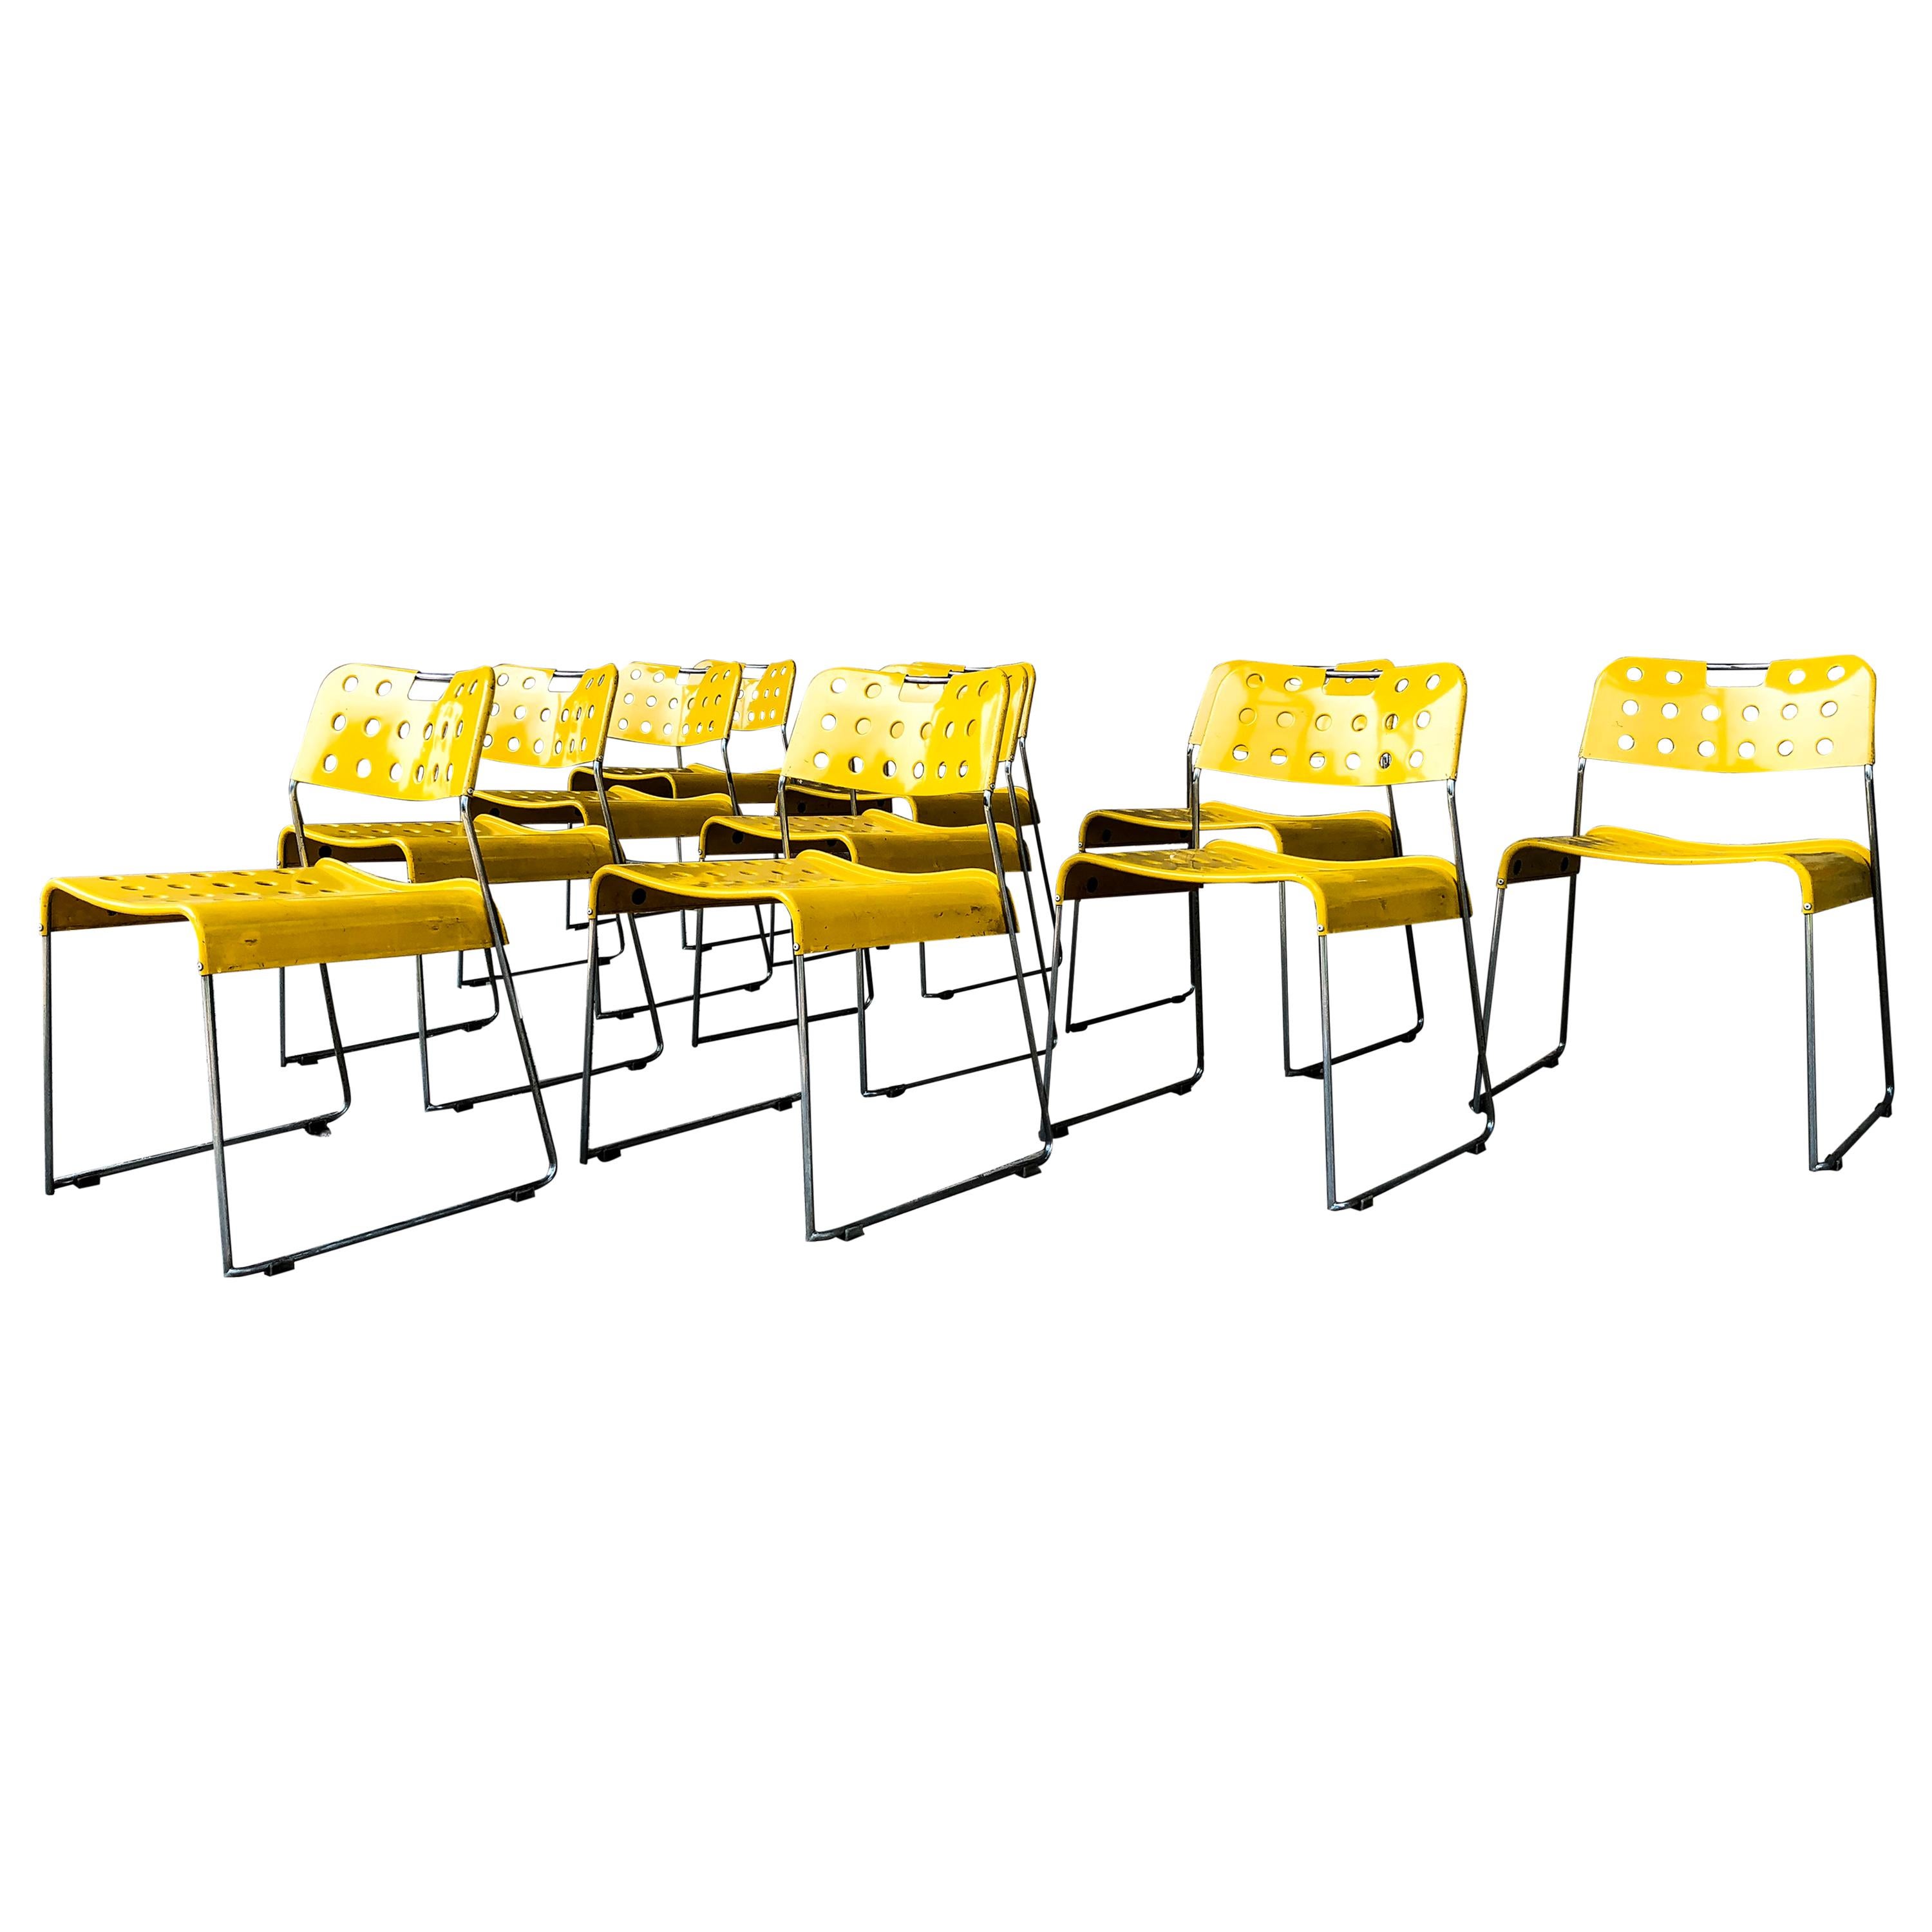 Late 20th Century Rodney Kinsman Space Age Yellow Omstak Chair for Bieffeplast, 1971, Set of 18 For Sale